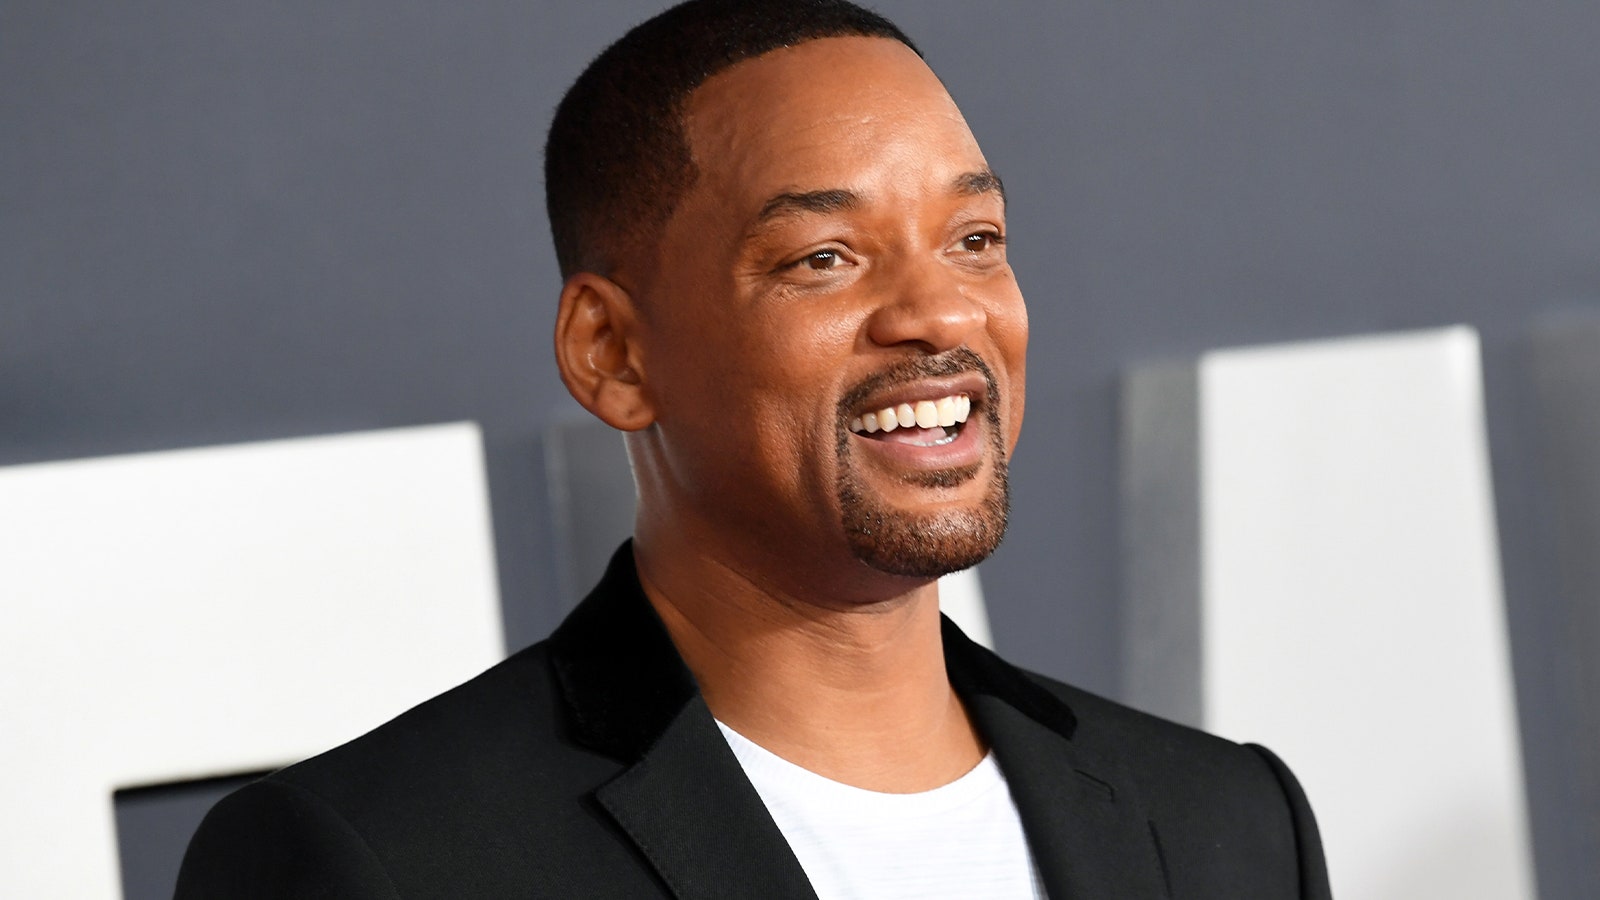 Check Out the Highest-Paid Actors in the World